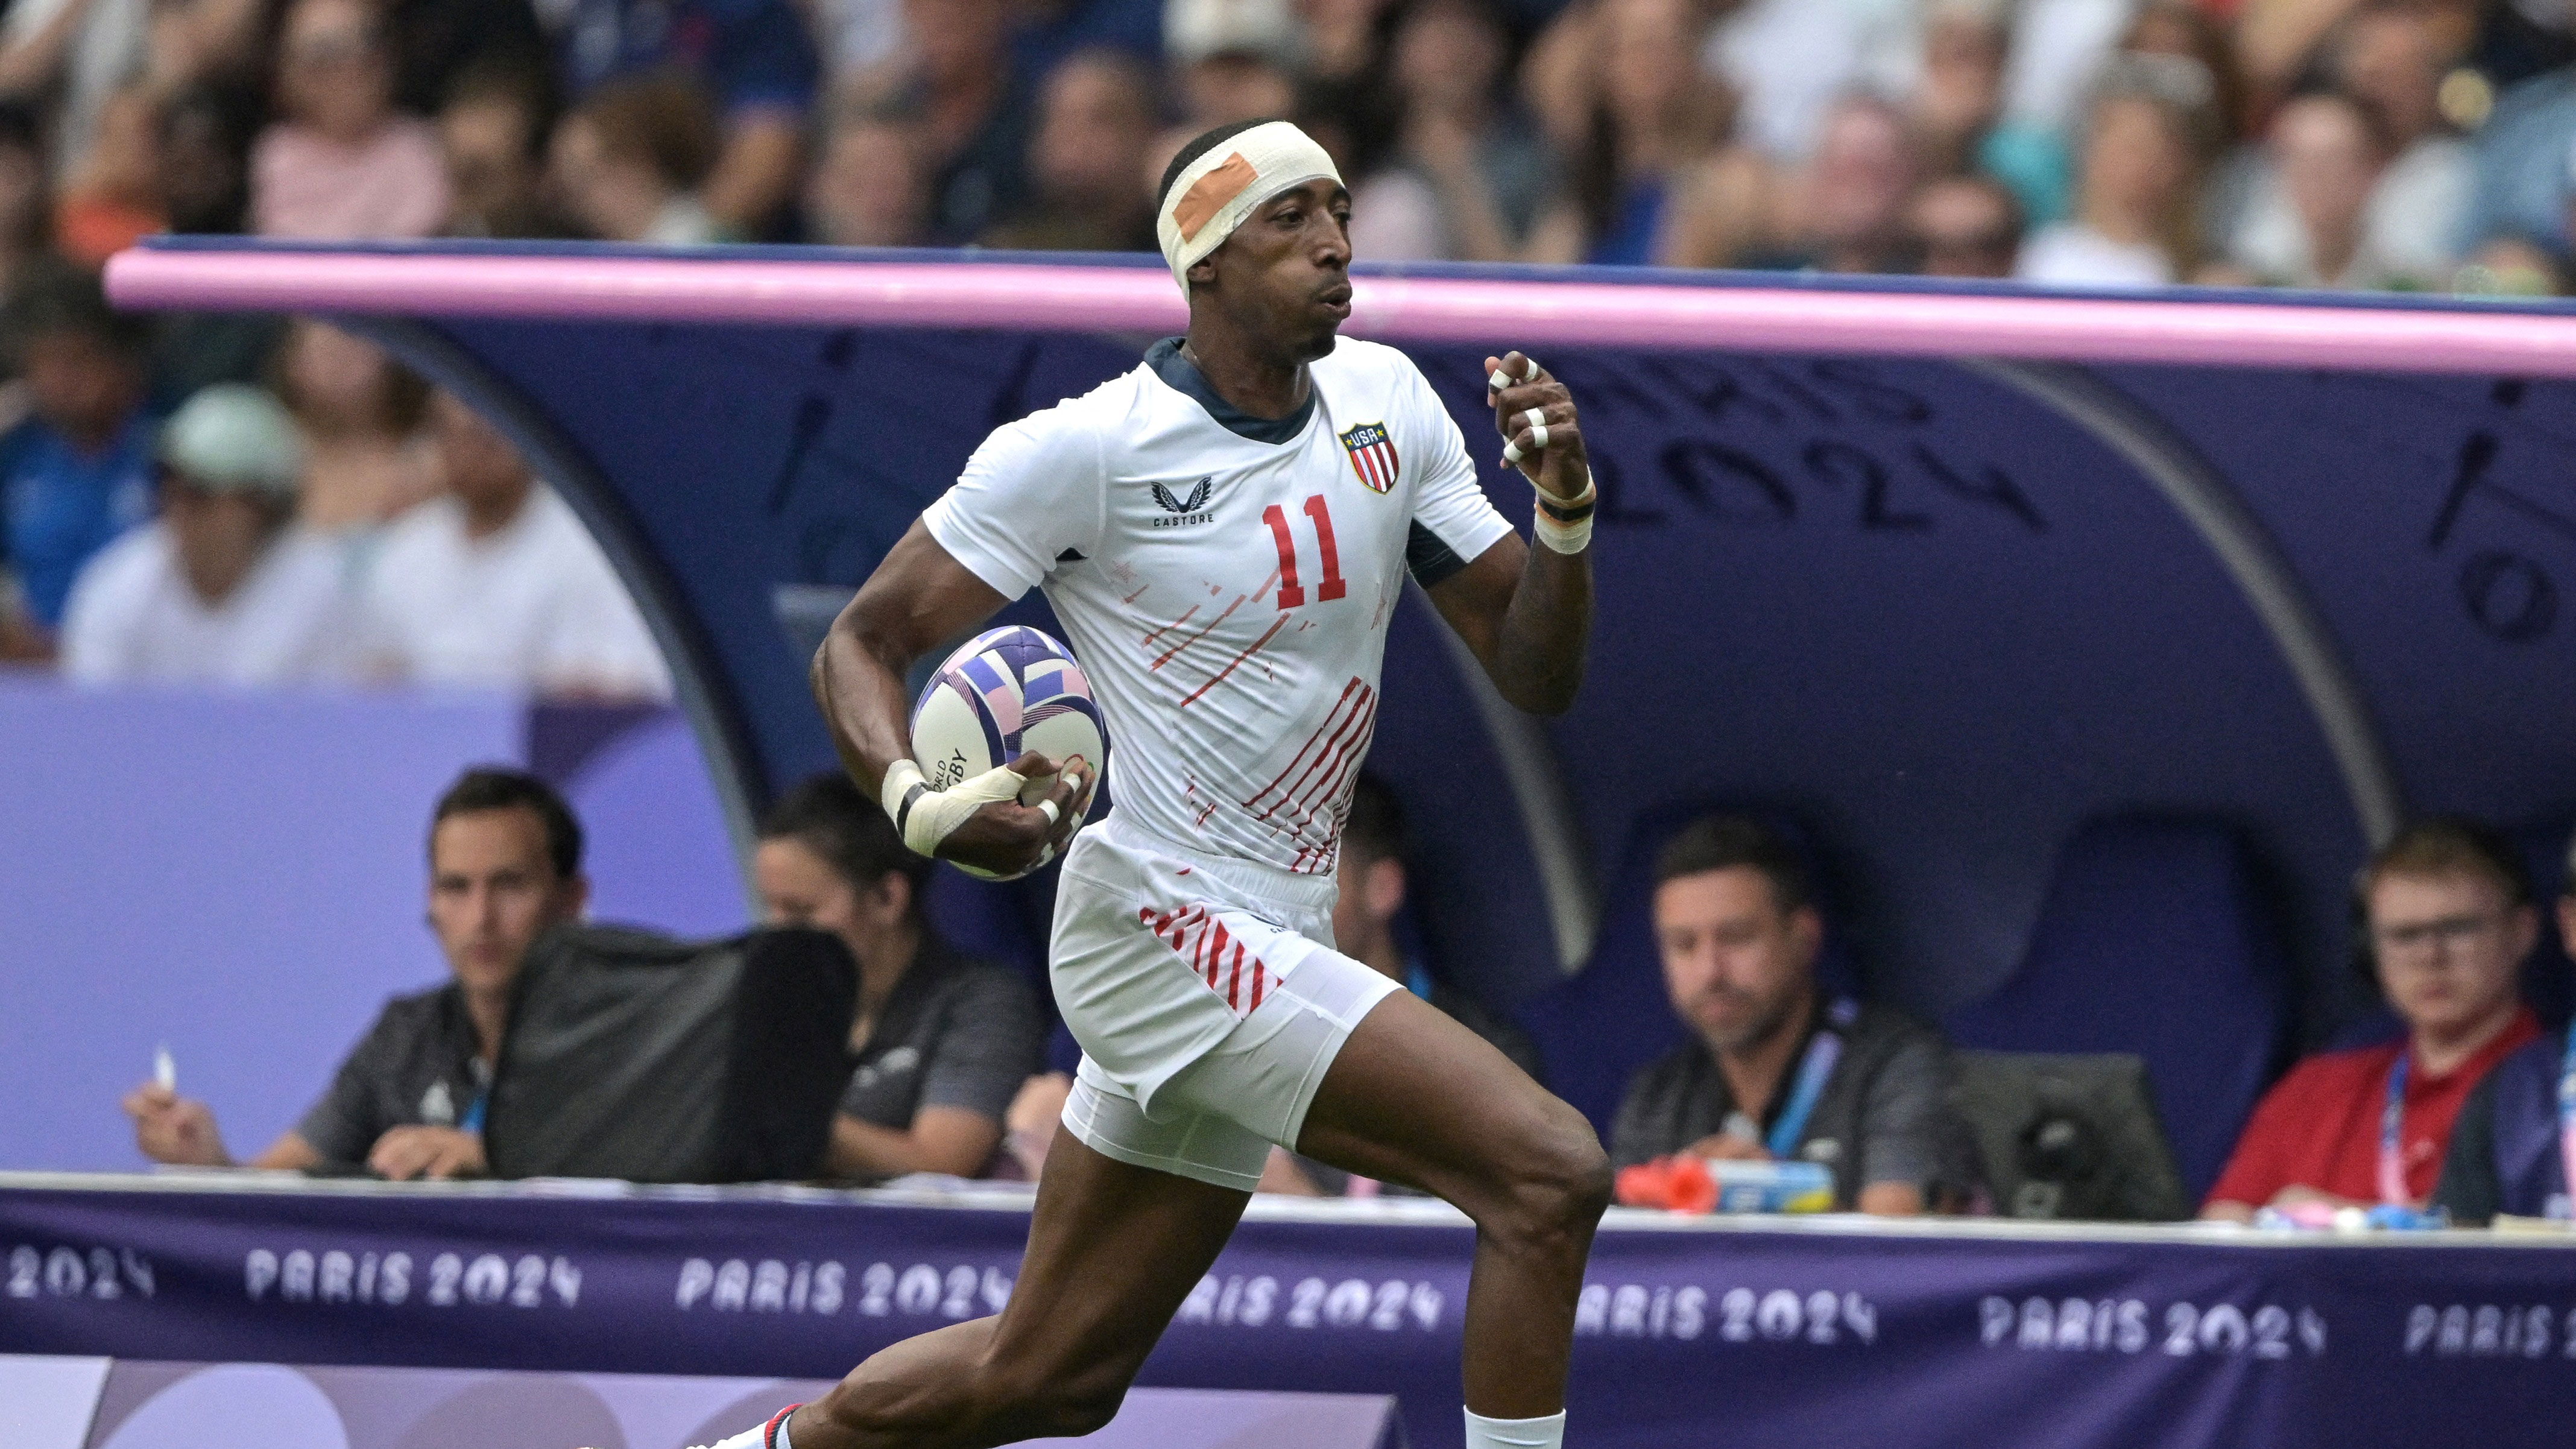 US men's rugby team reaches Olympic quarterfinals with win over Uruguay